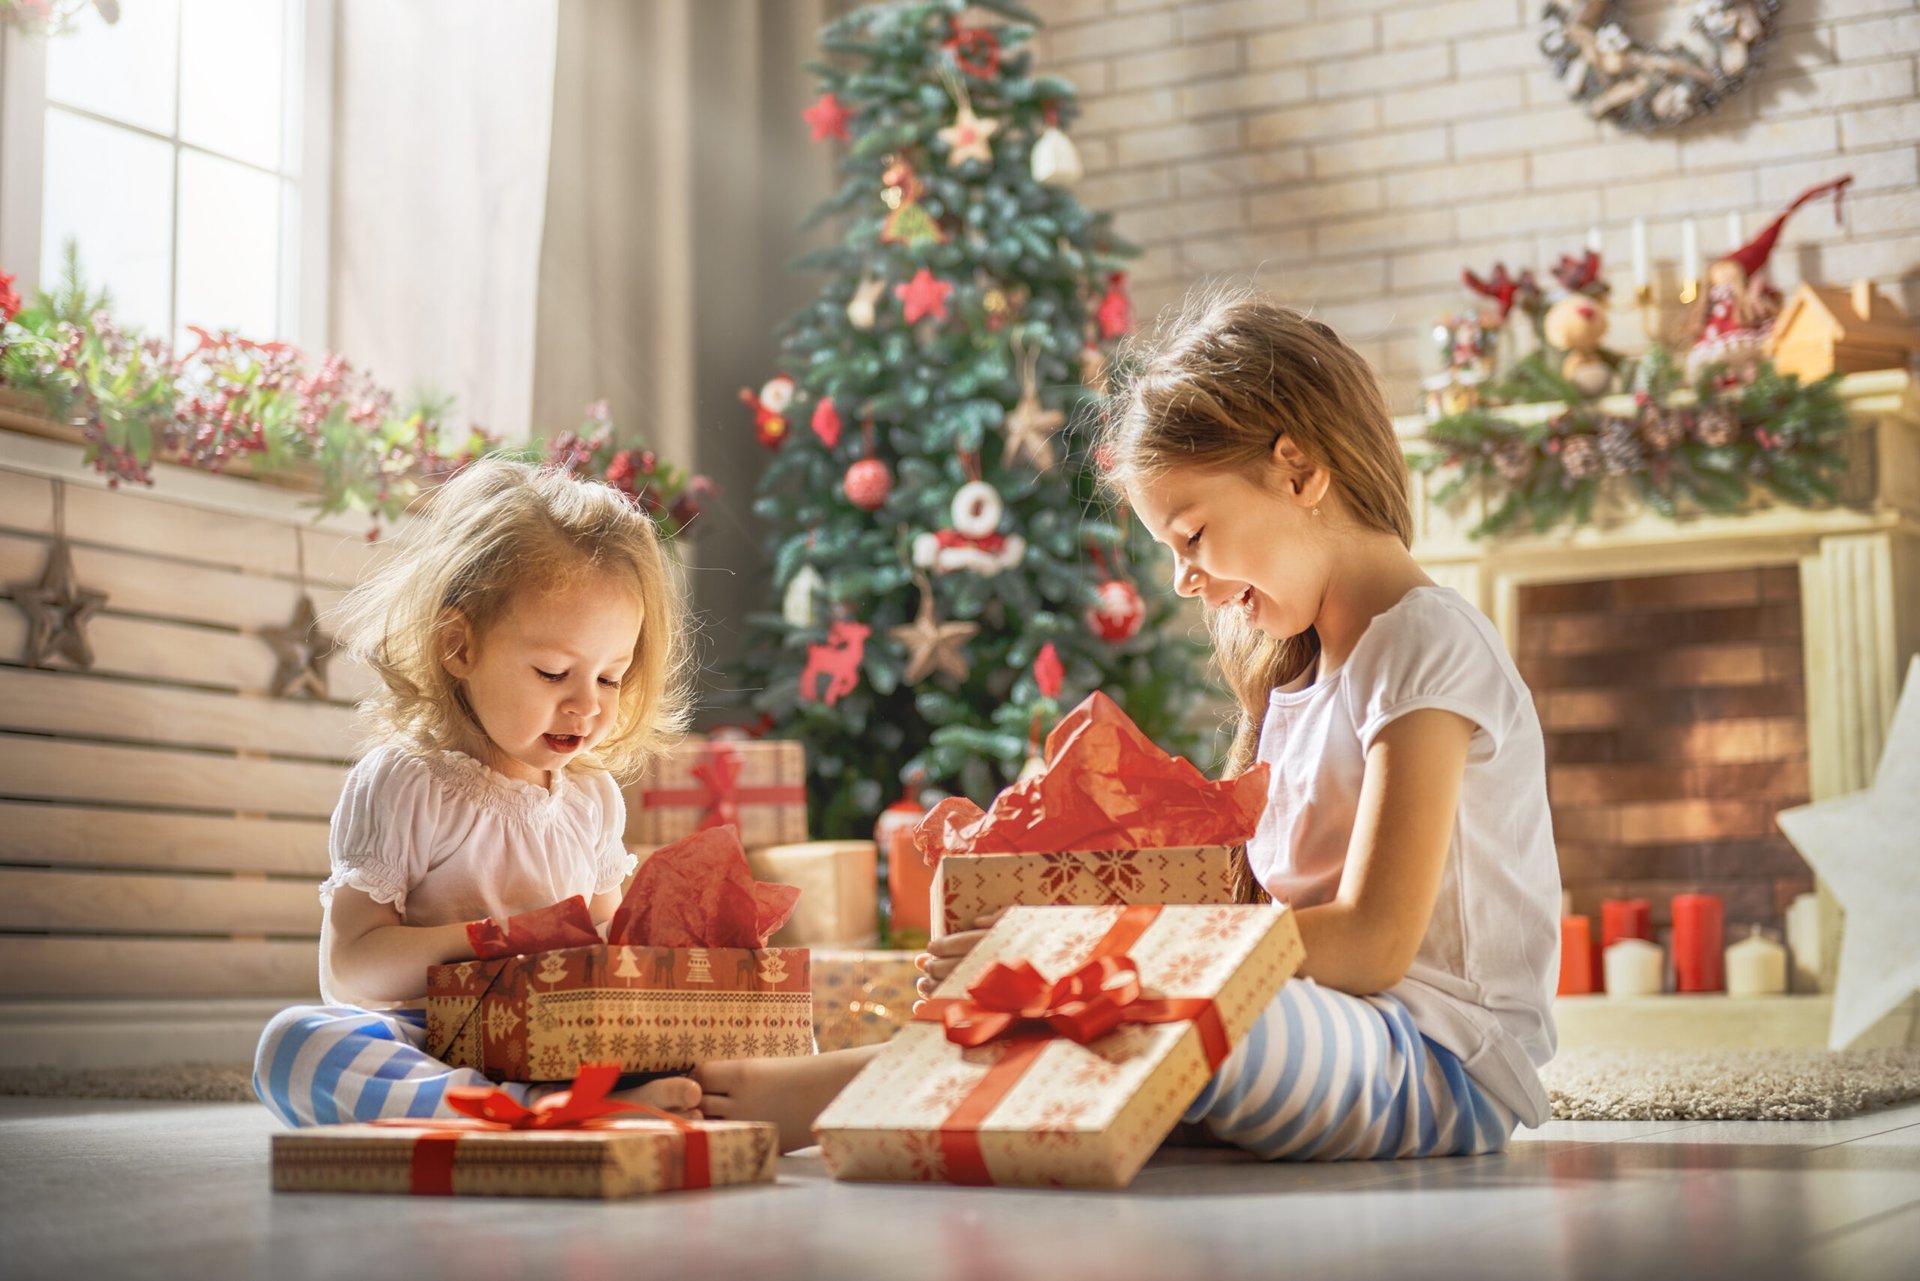 Children opening presents at Christmas